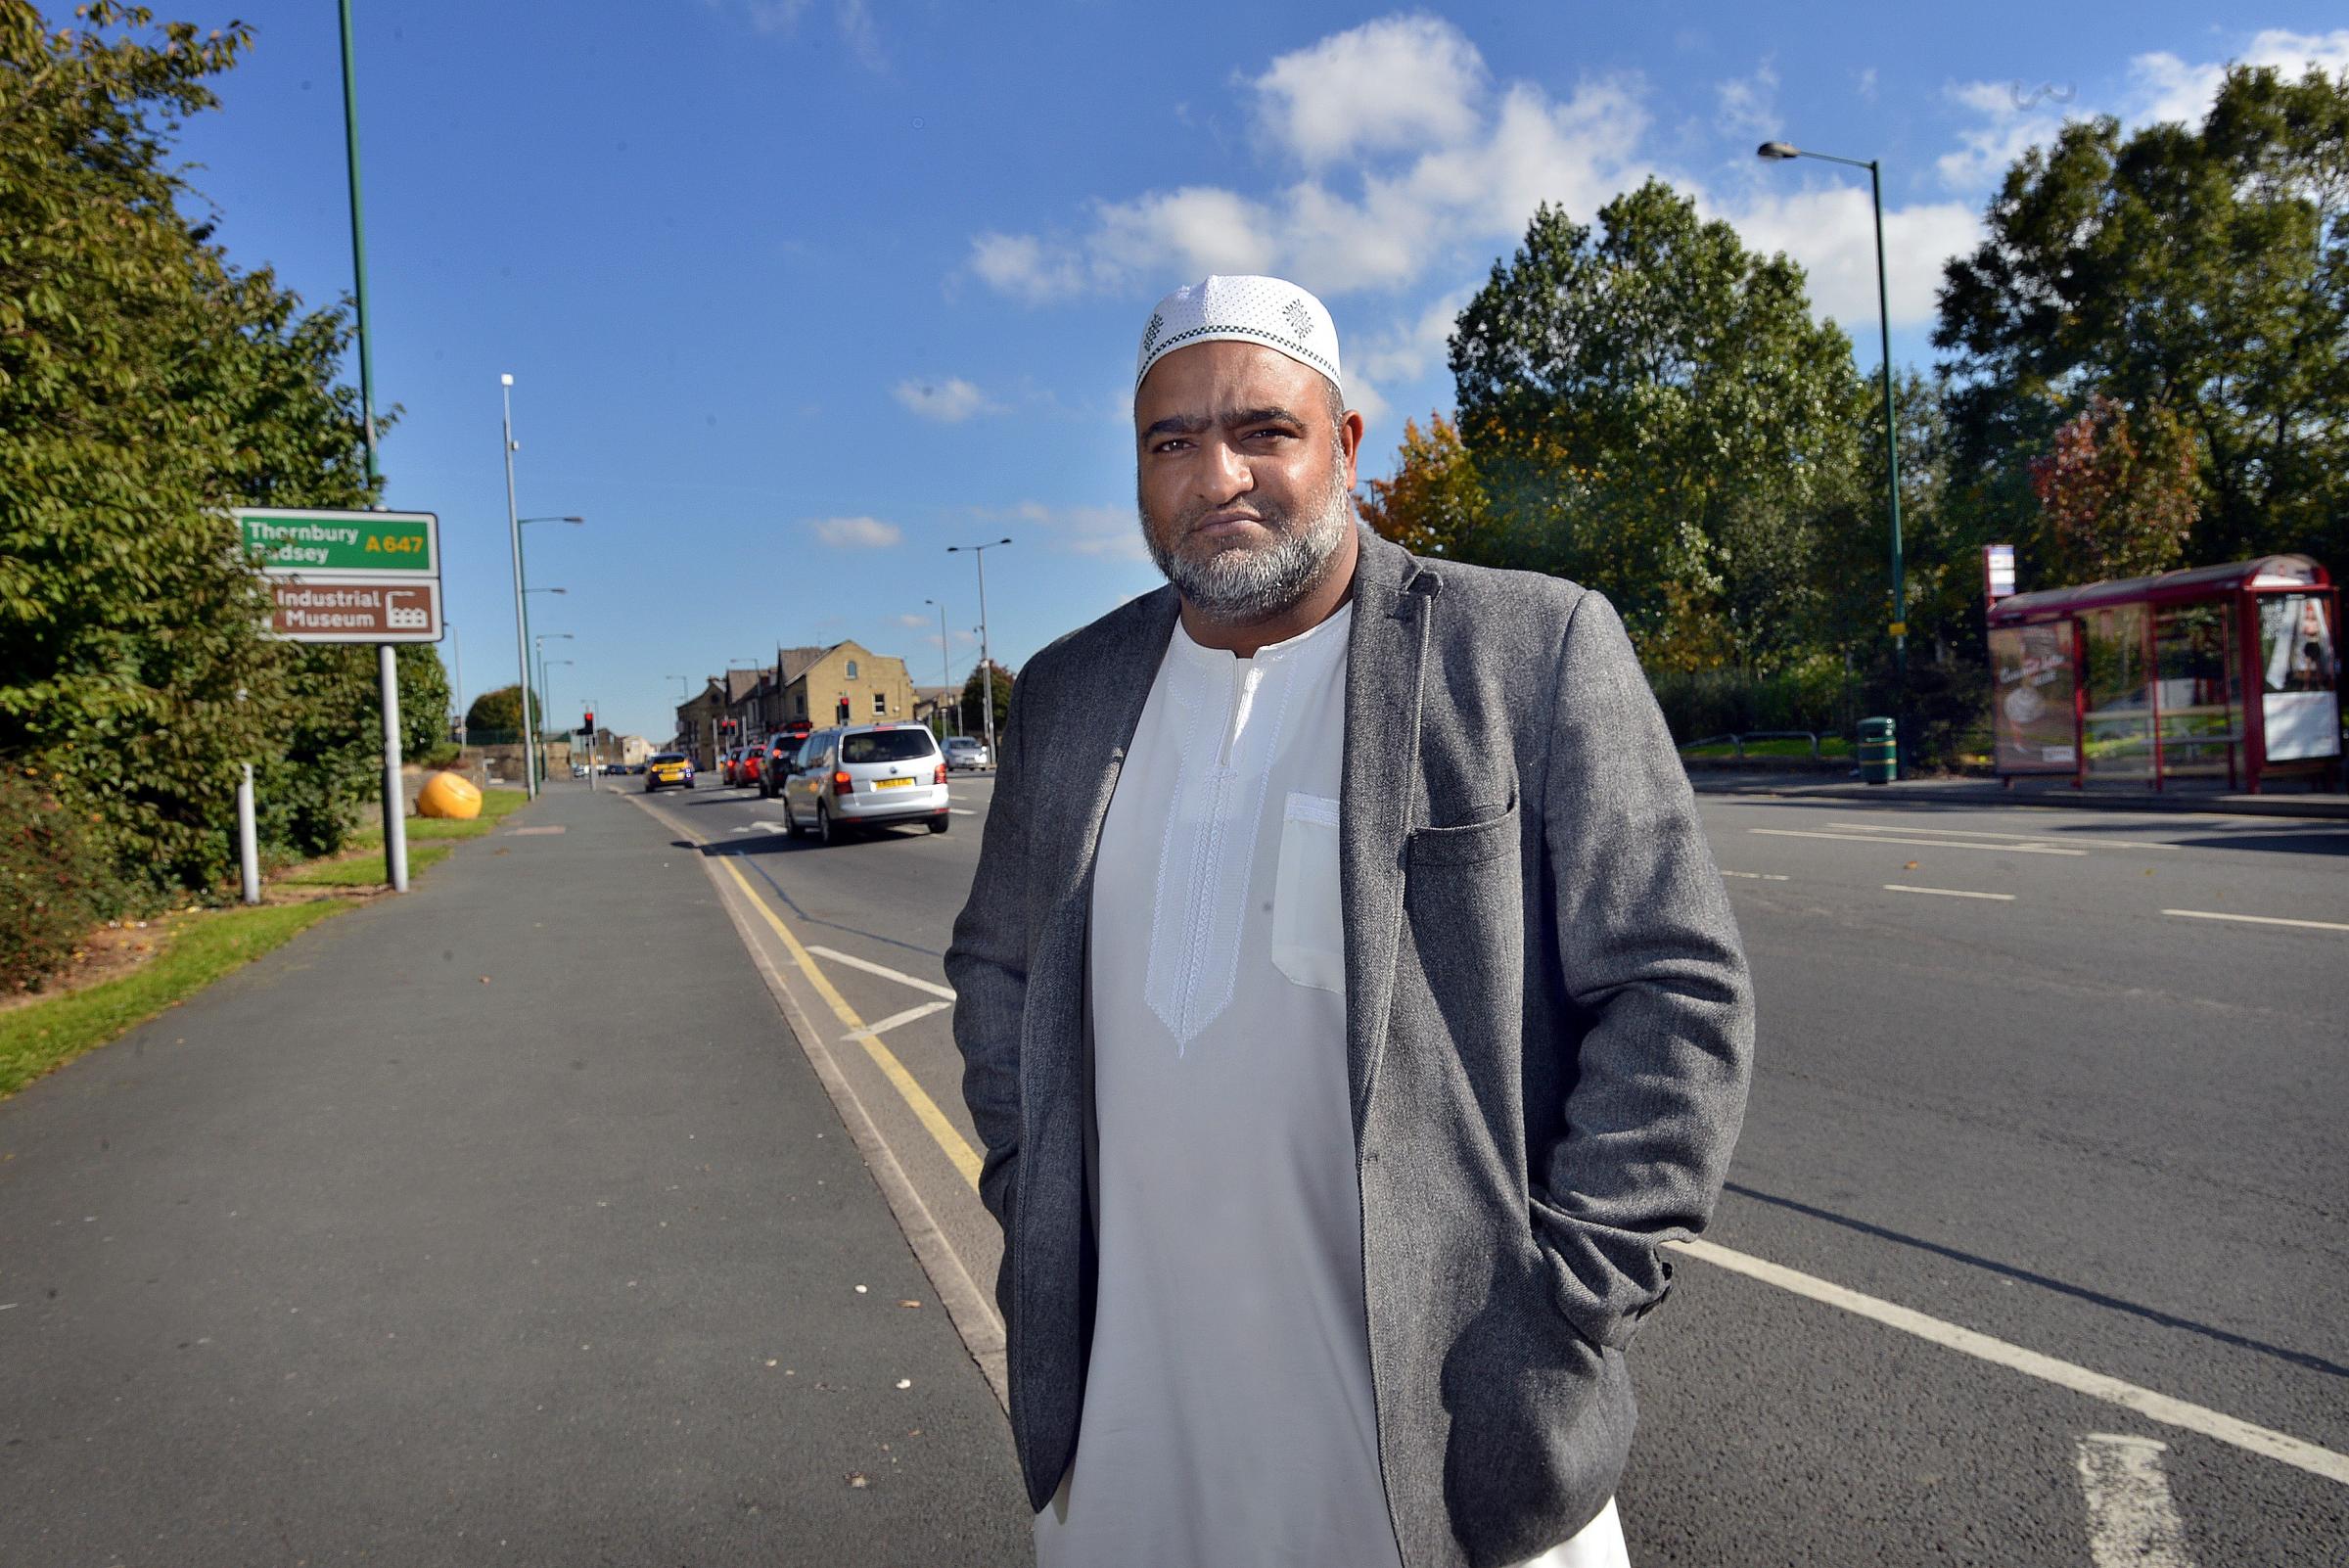 Road safety campaigner condemns driver with 62 points on licence